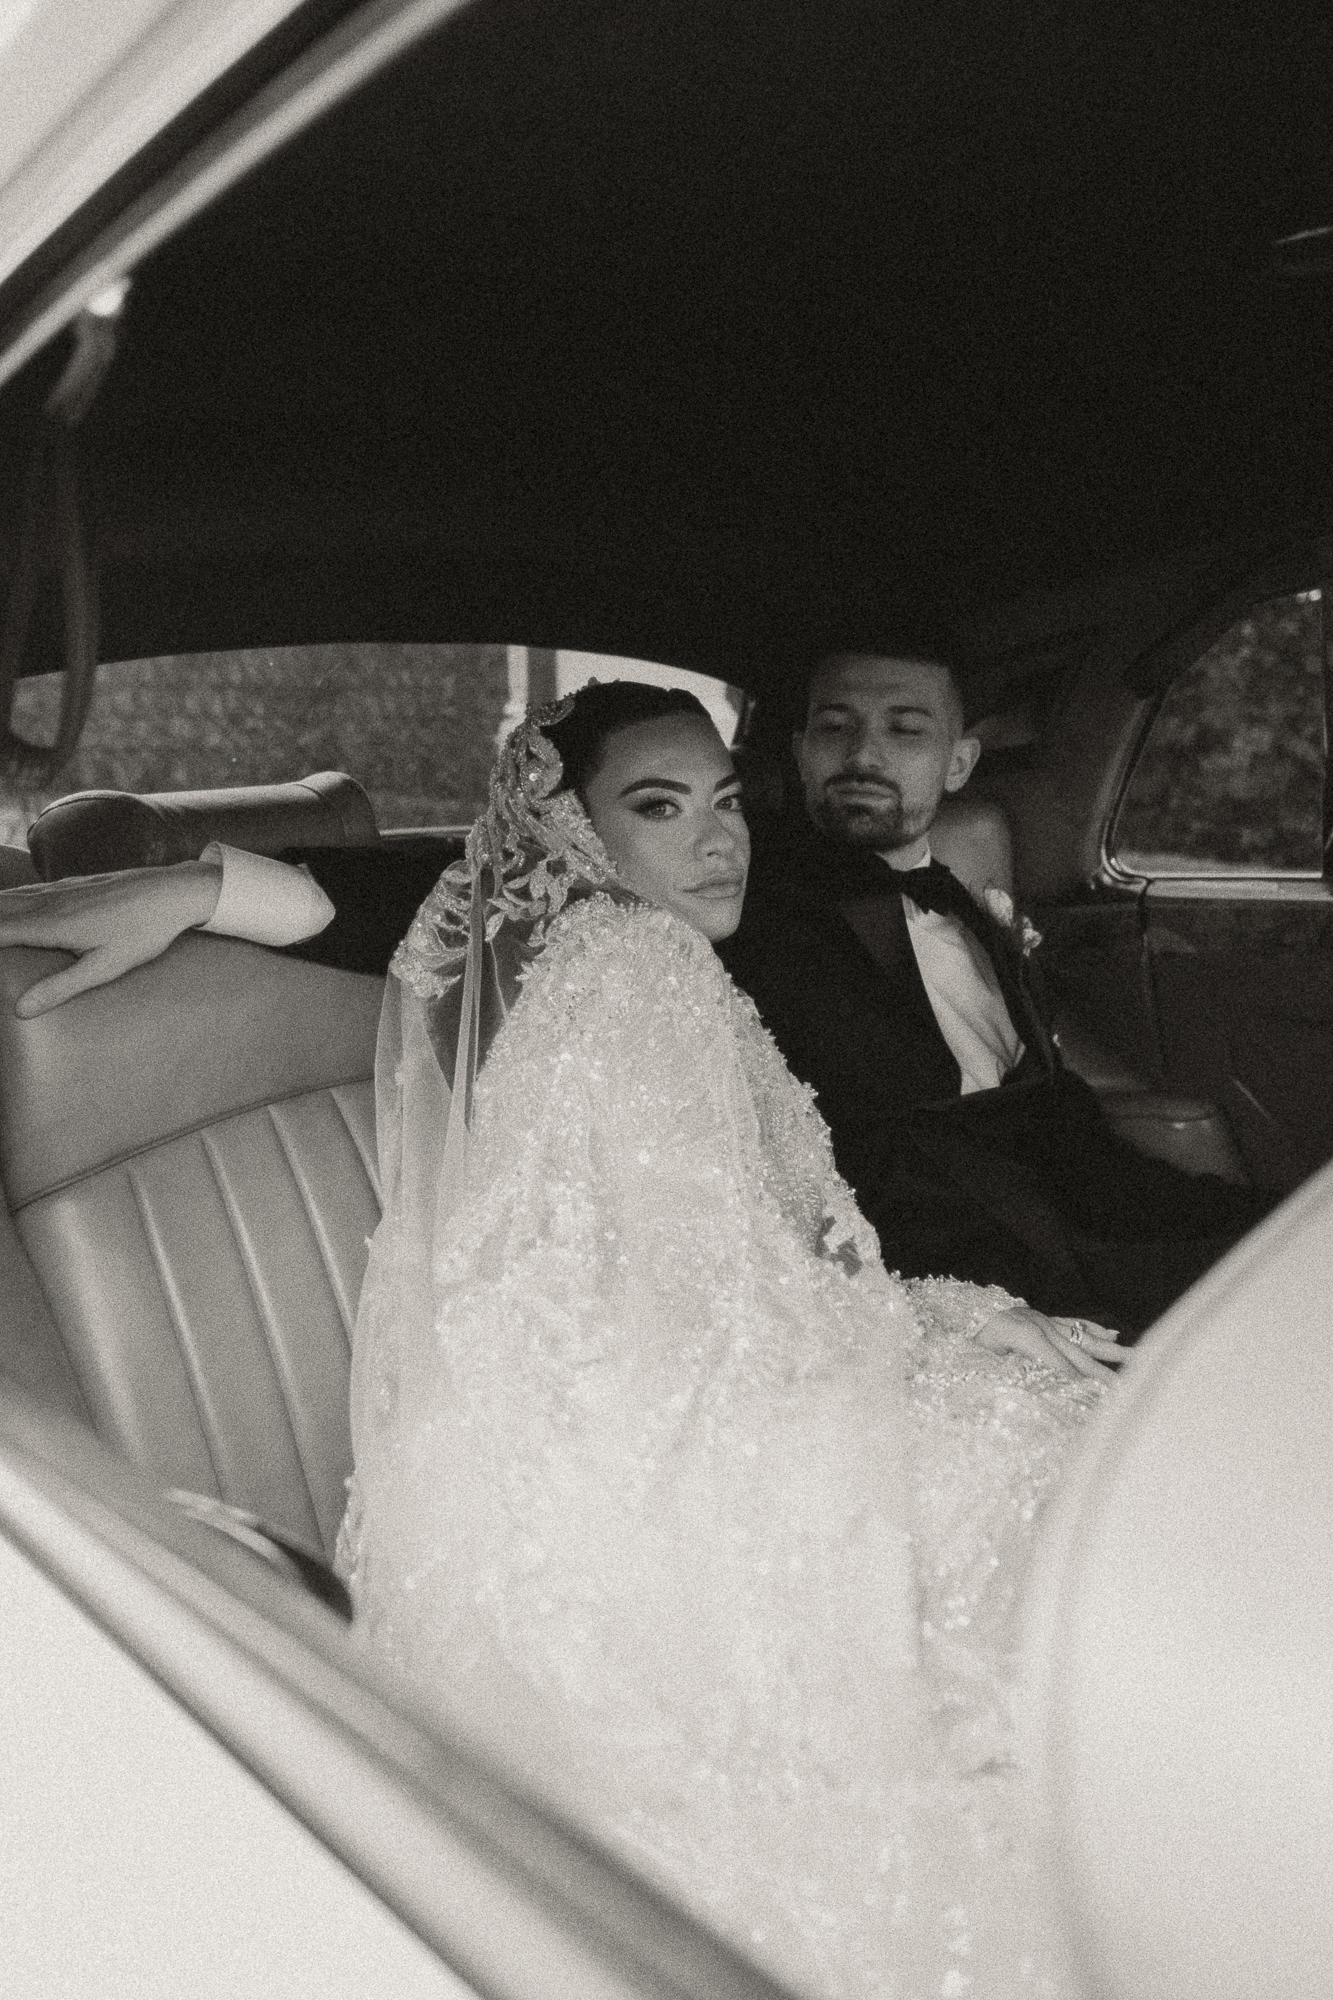 In black and white, Alexa and Anthony sit together in a vintage rolls royce and look out the window.